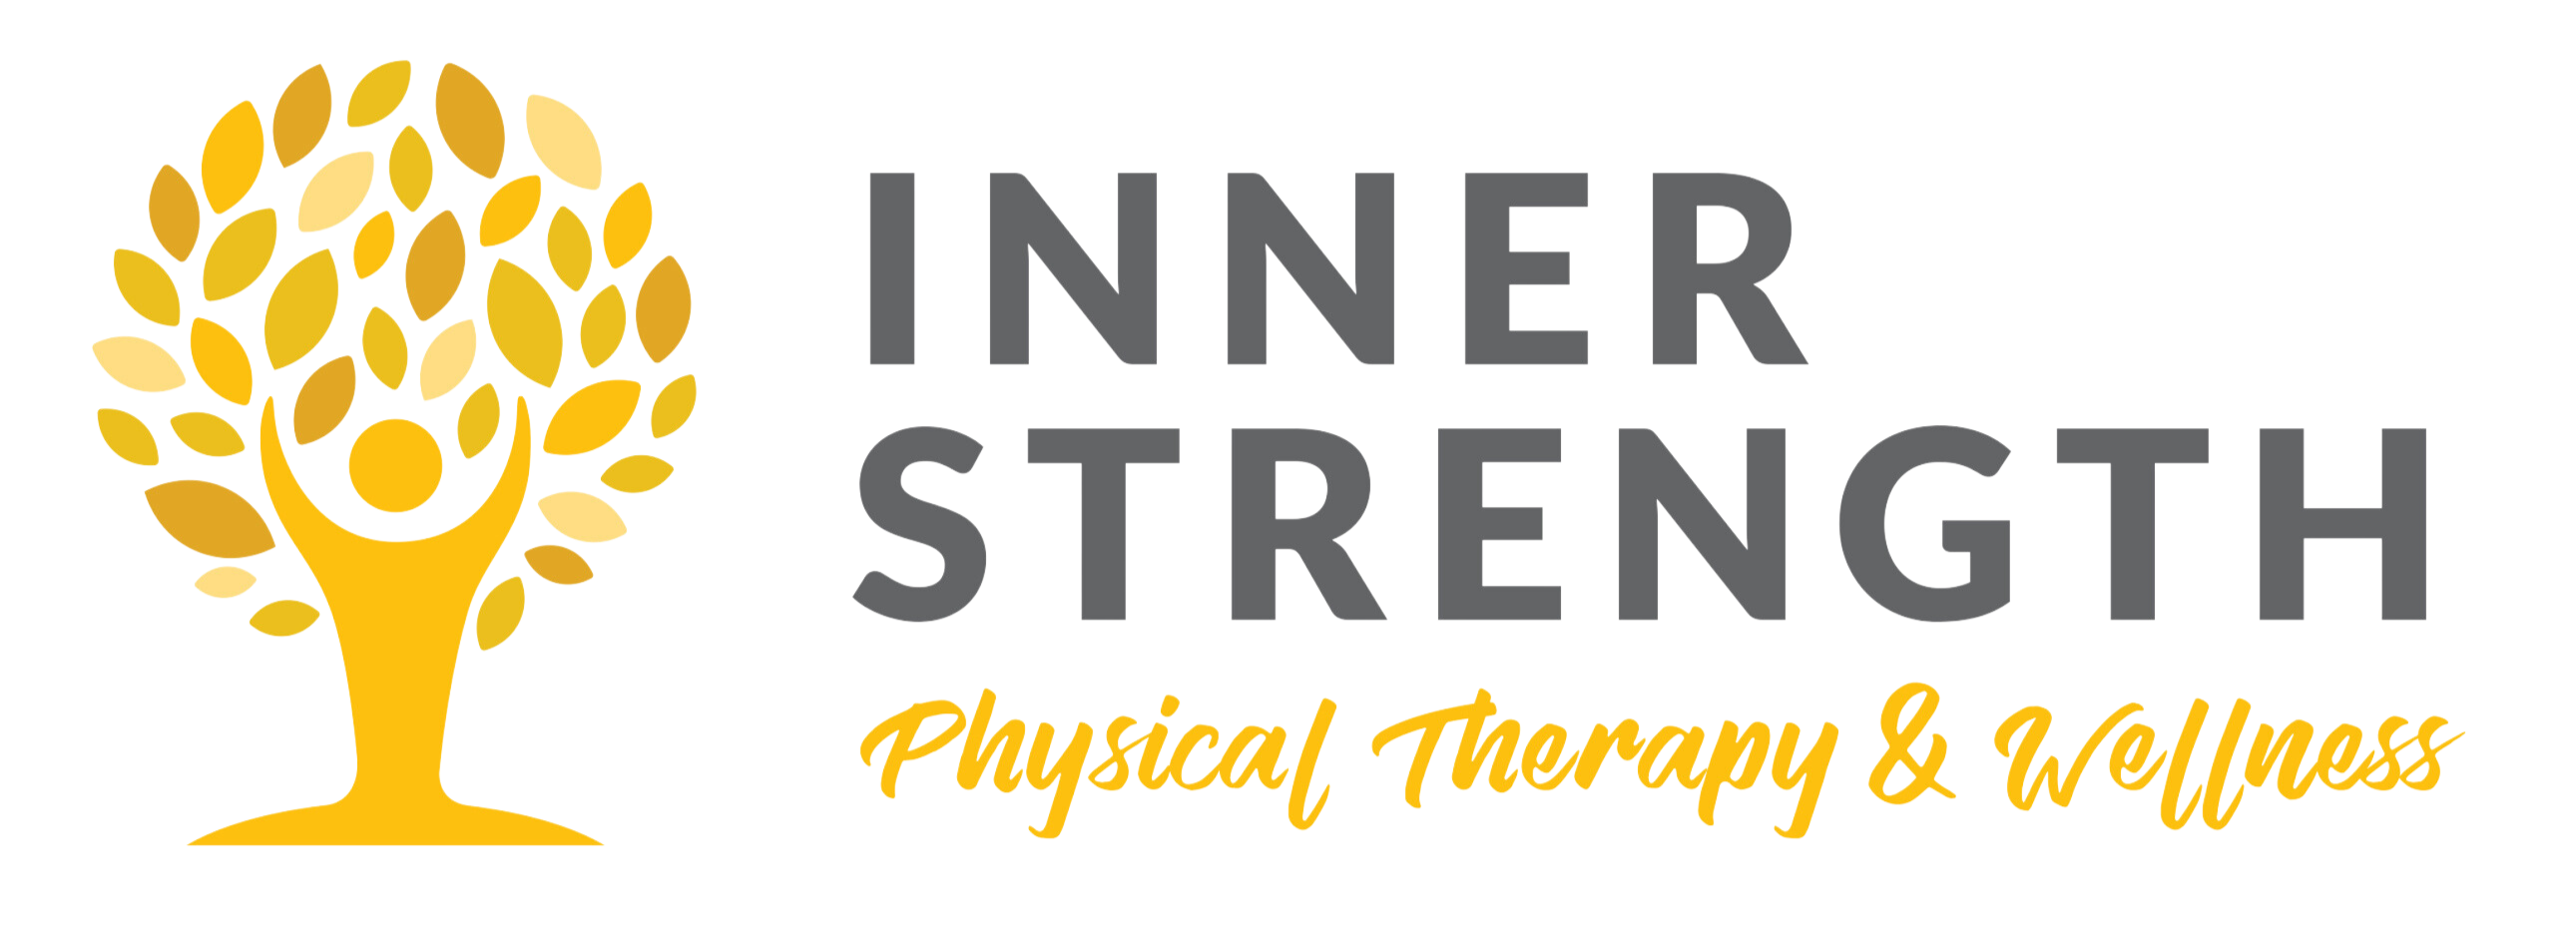 Inner Strength Physical Therapy